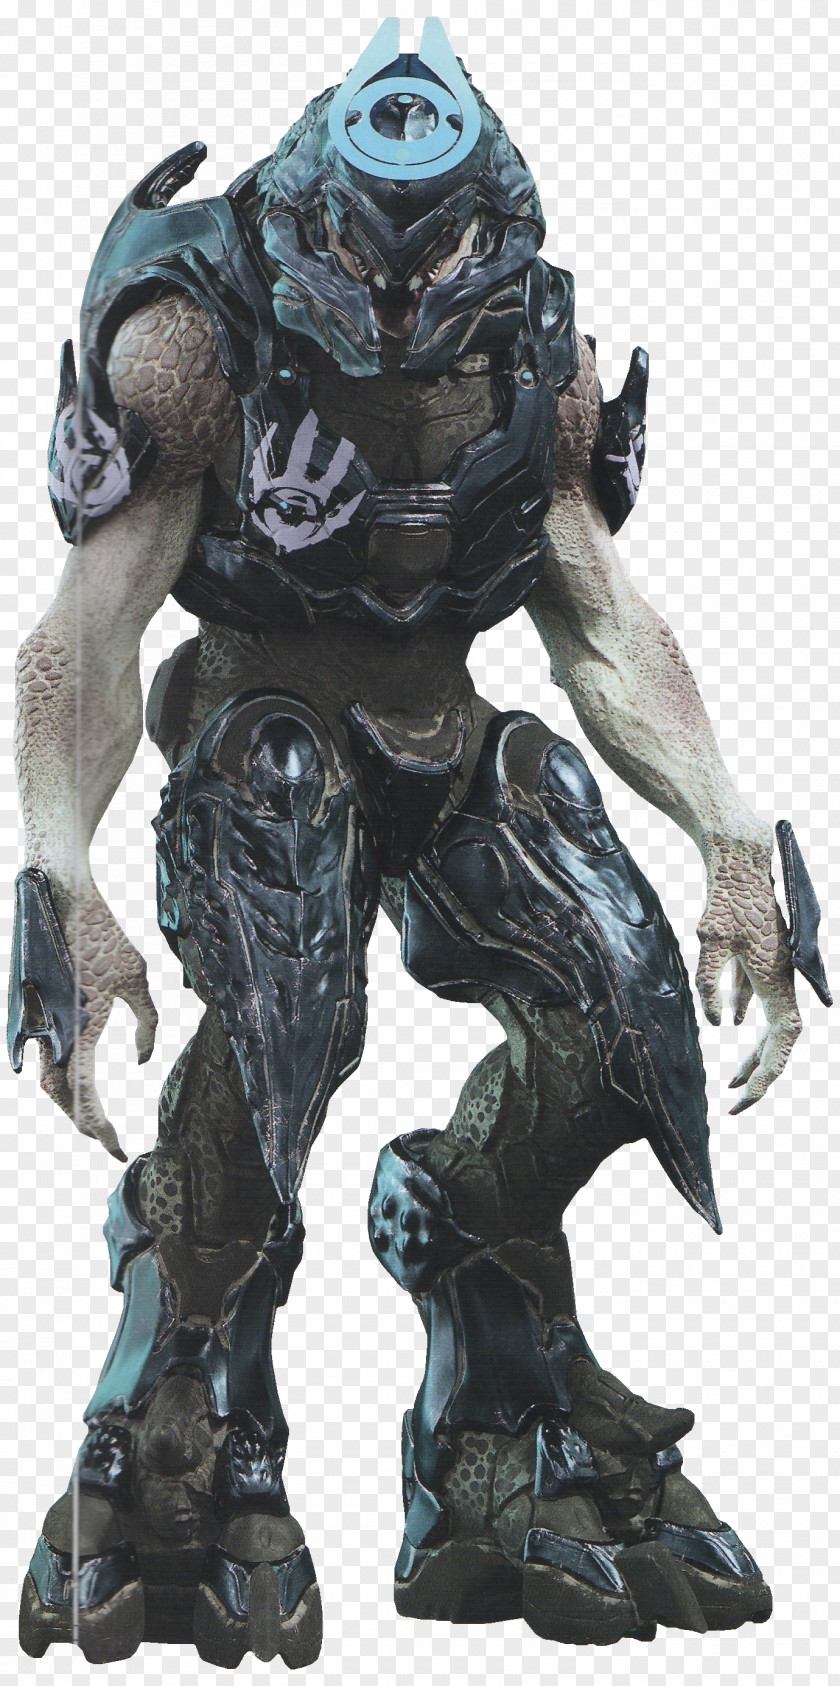 Halo 4 5: Guardians 2 Halo: The Master Chief Collection PNG